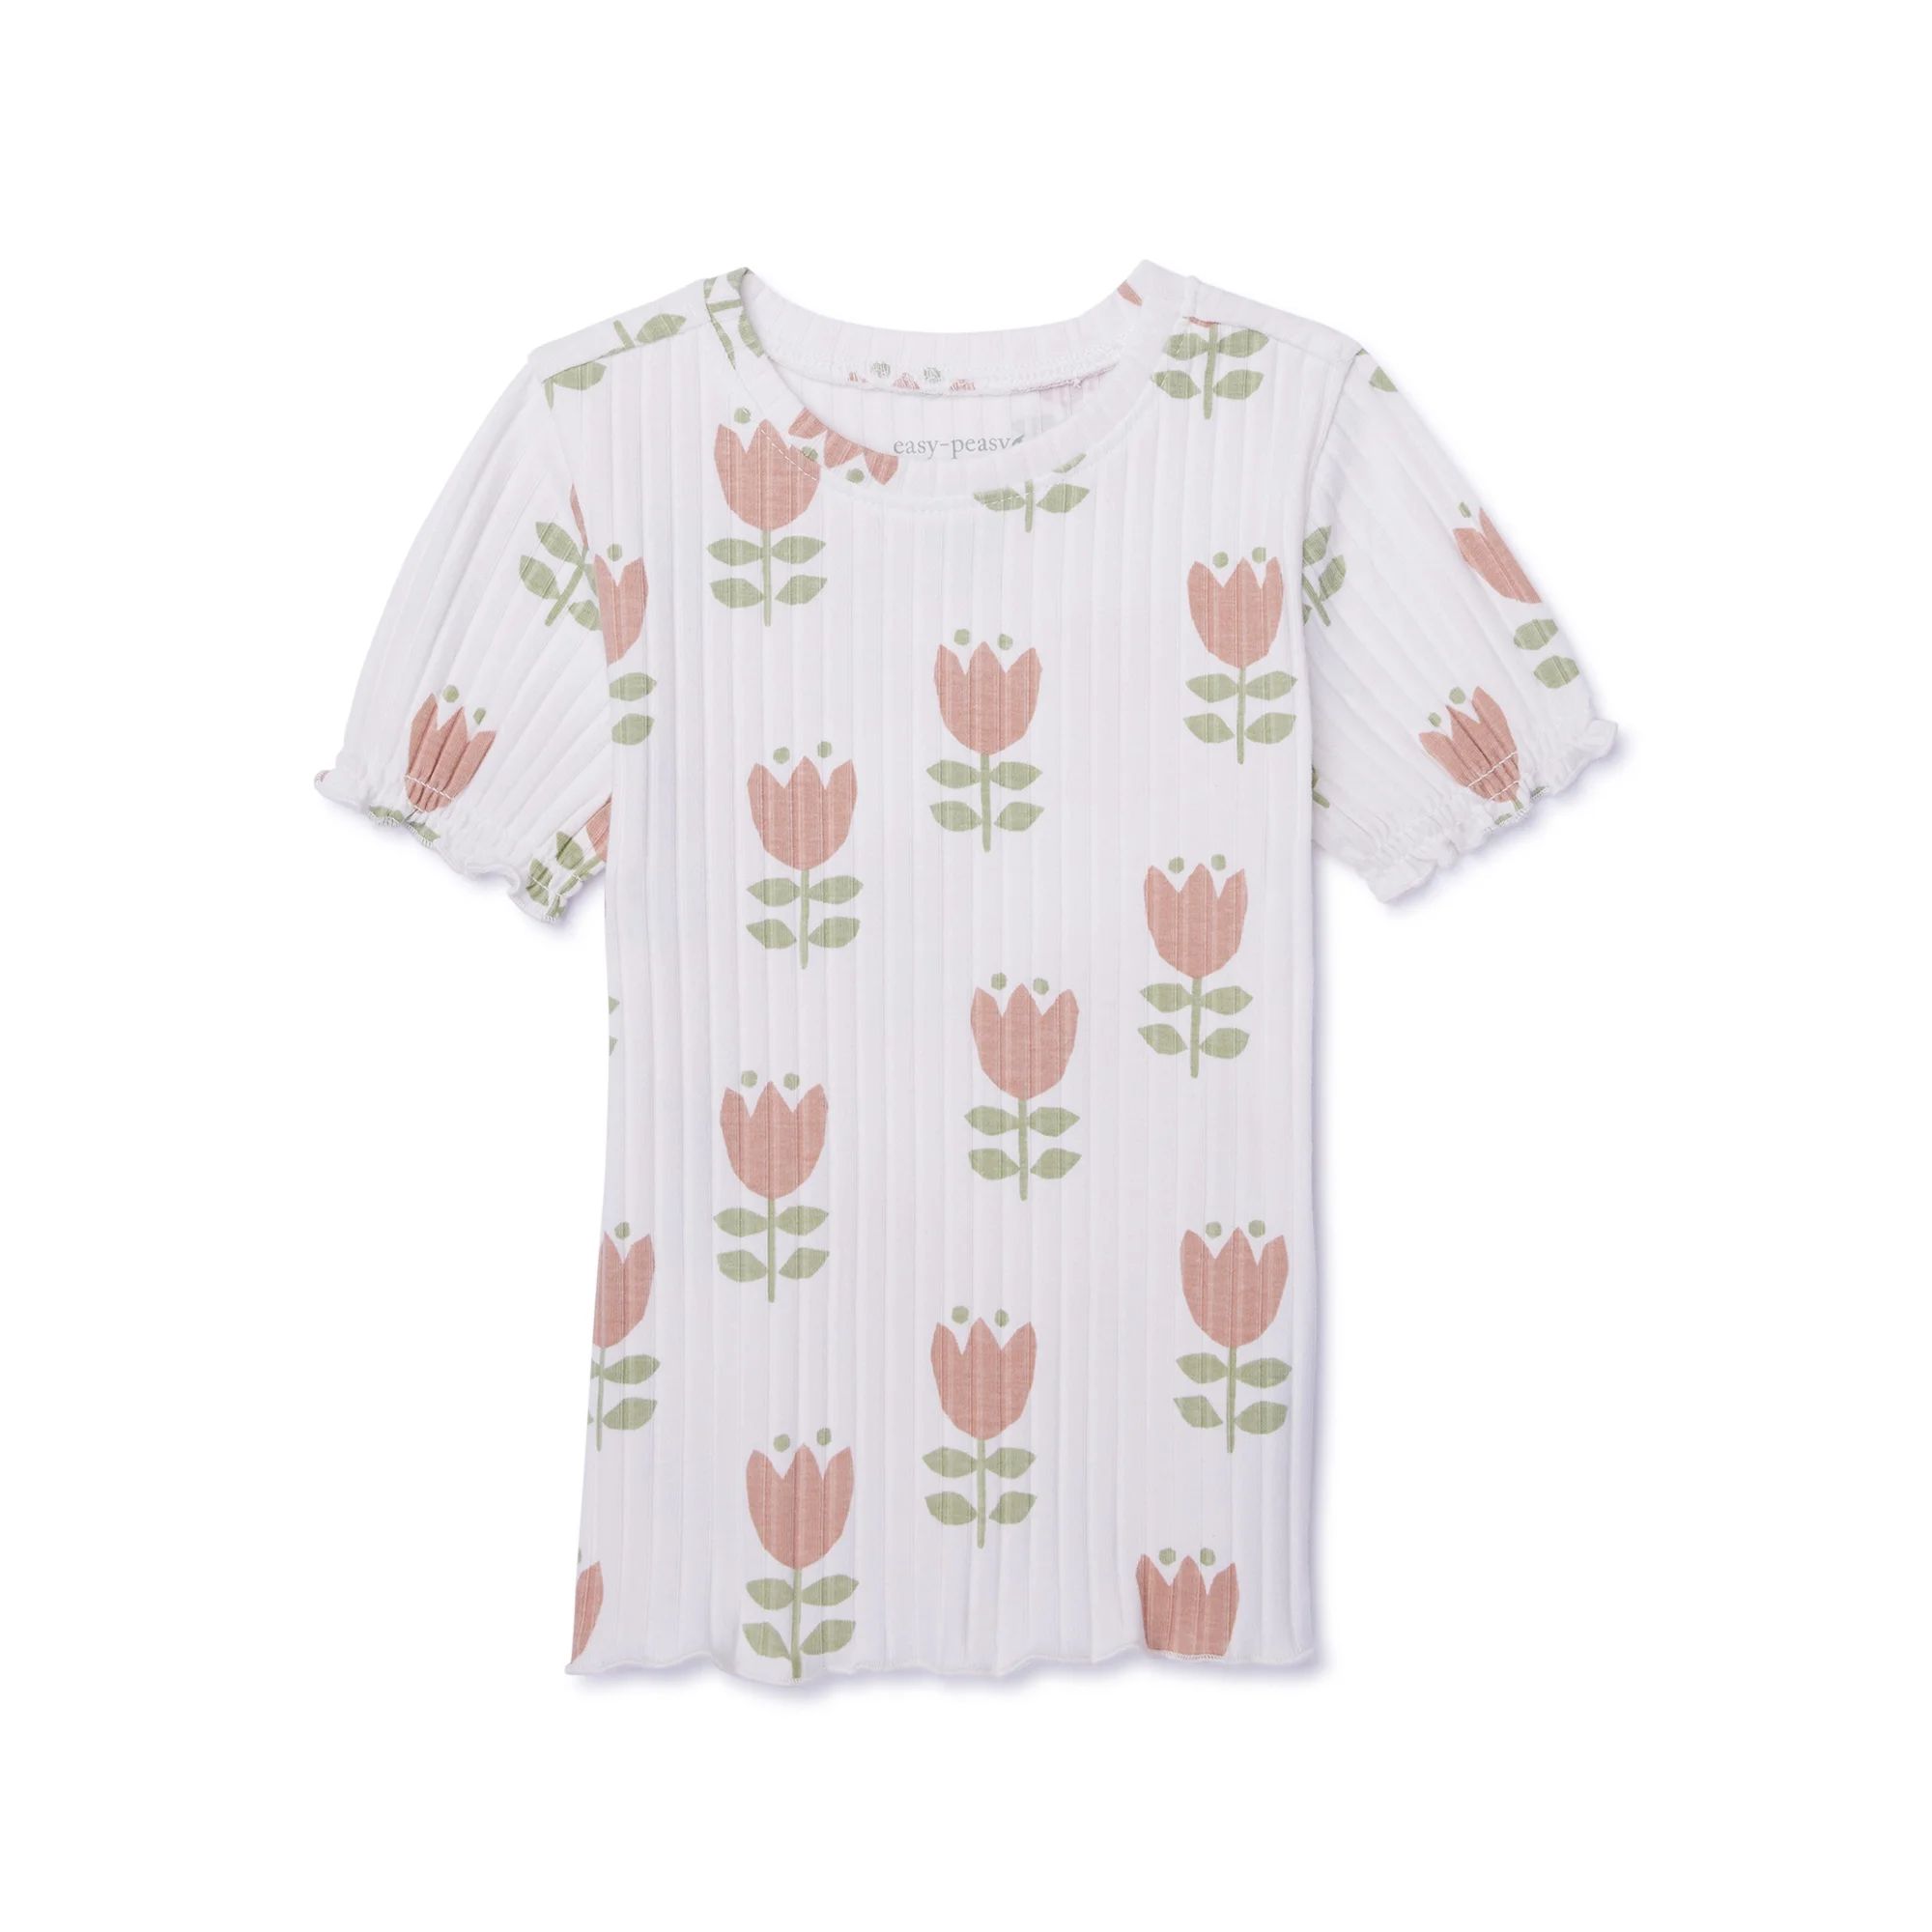 easy-peasy Toddler Girl Puff Sleeve T-Shirt, Sizes 18M-5T | Walmart (US)